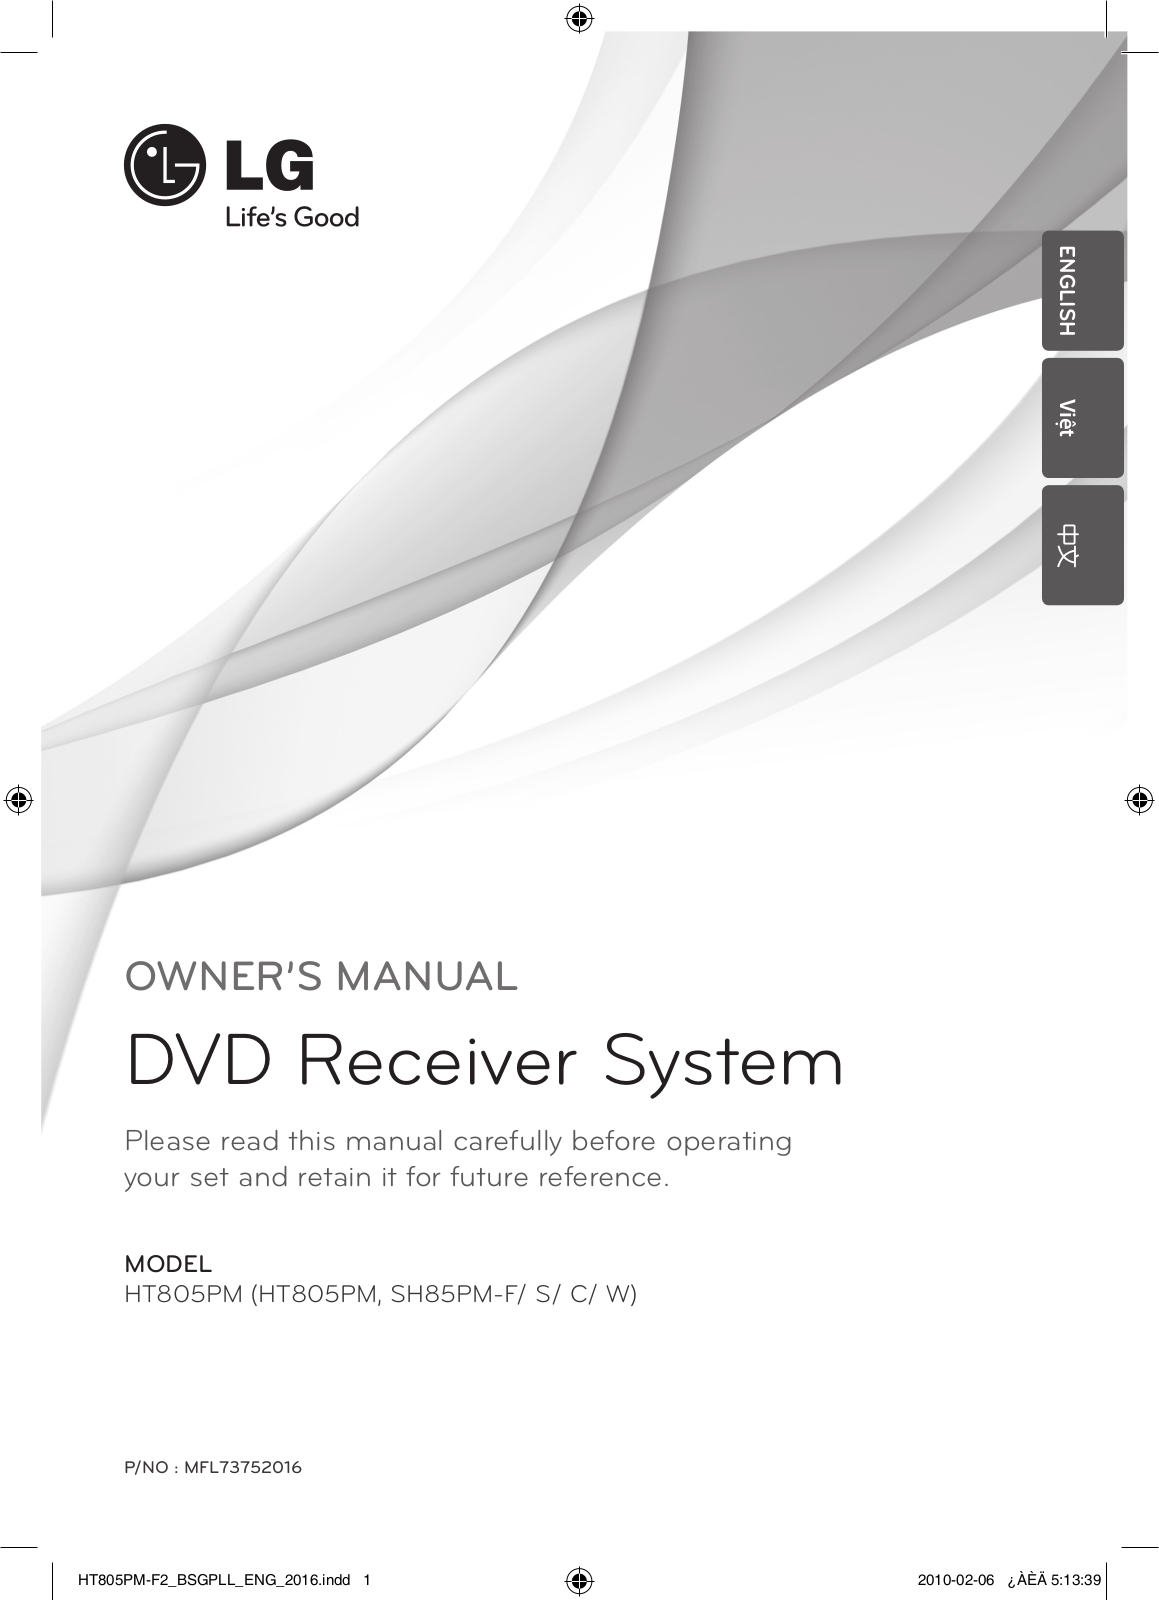 LG HT805PM-F2 Owner’s Manual